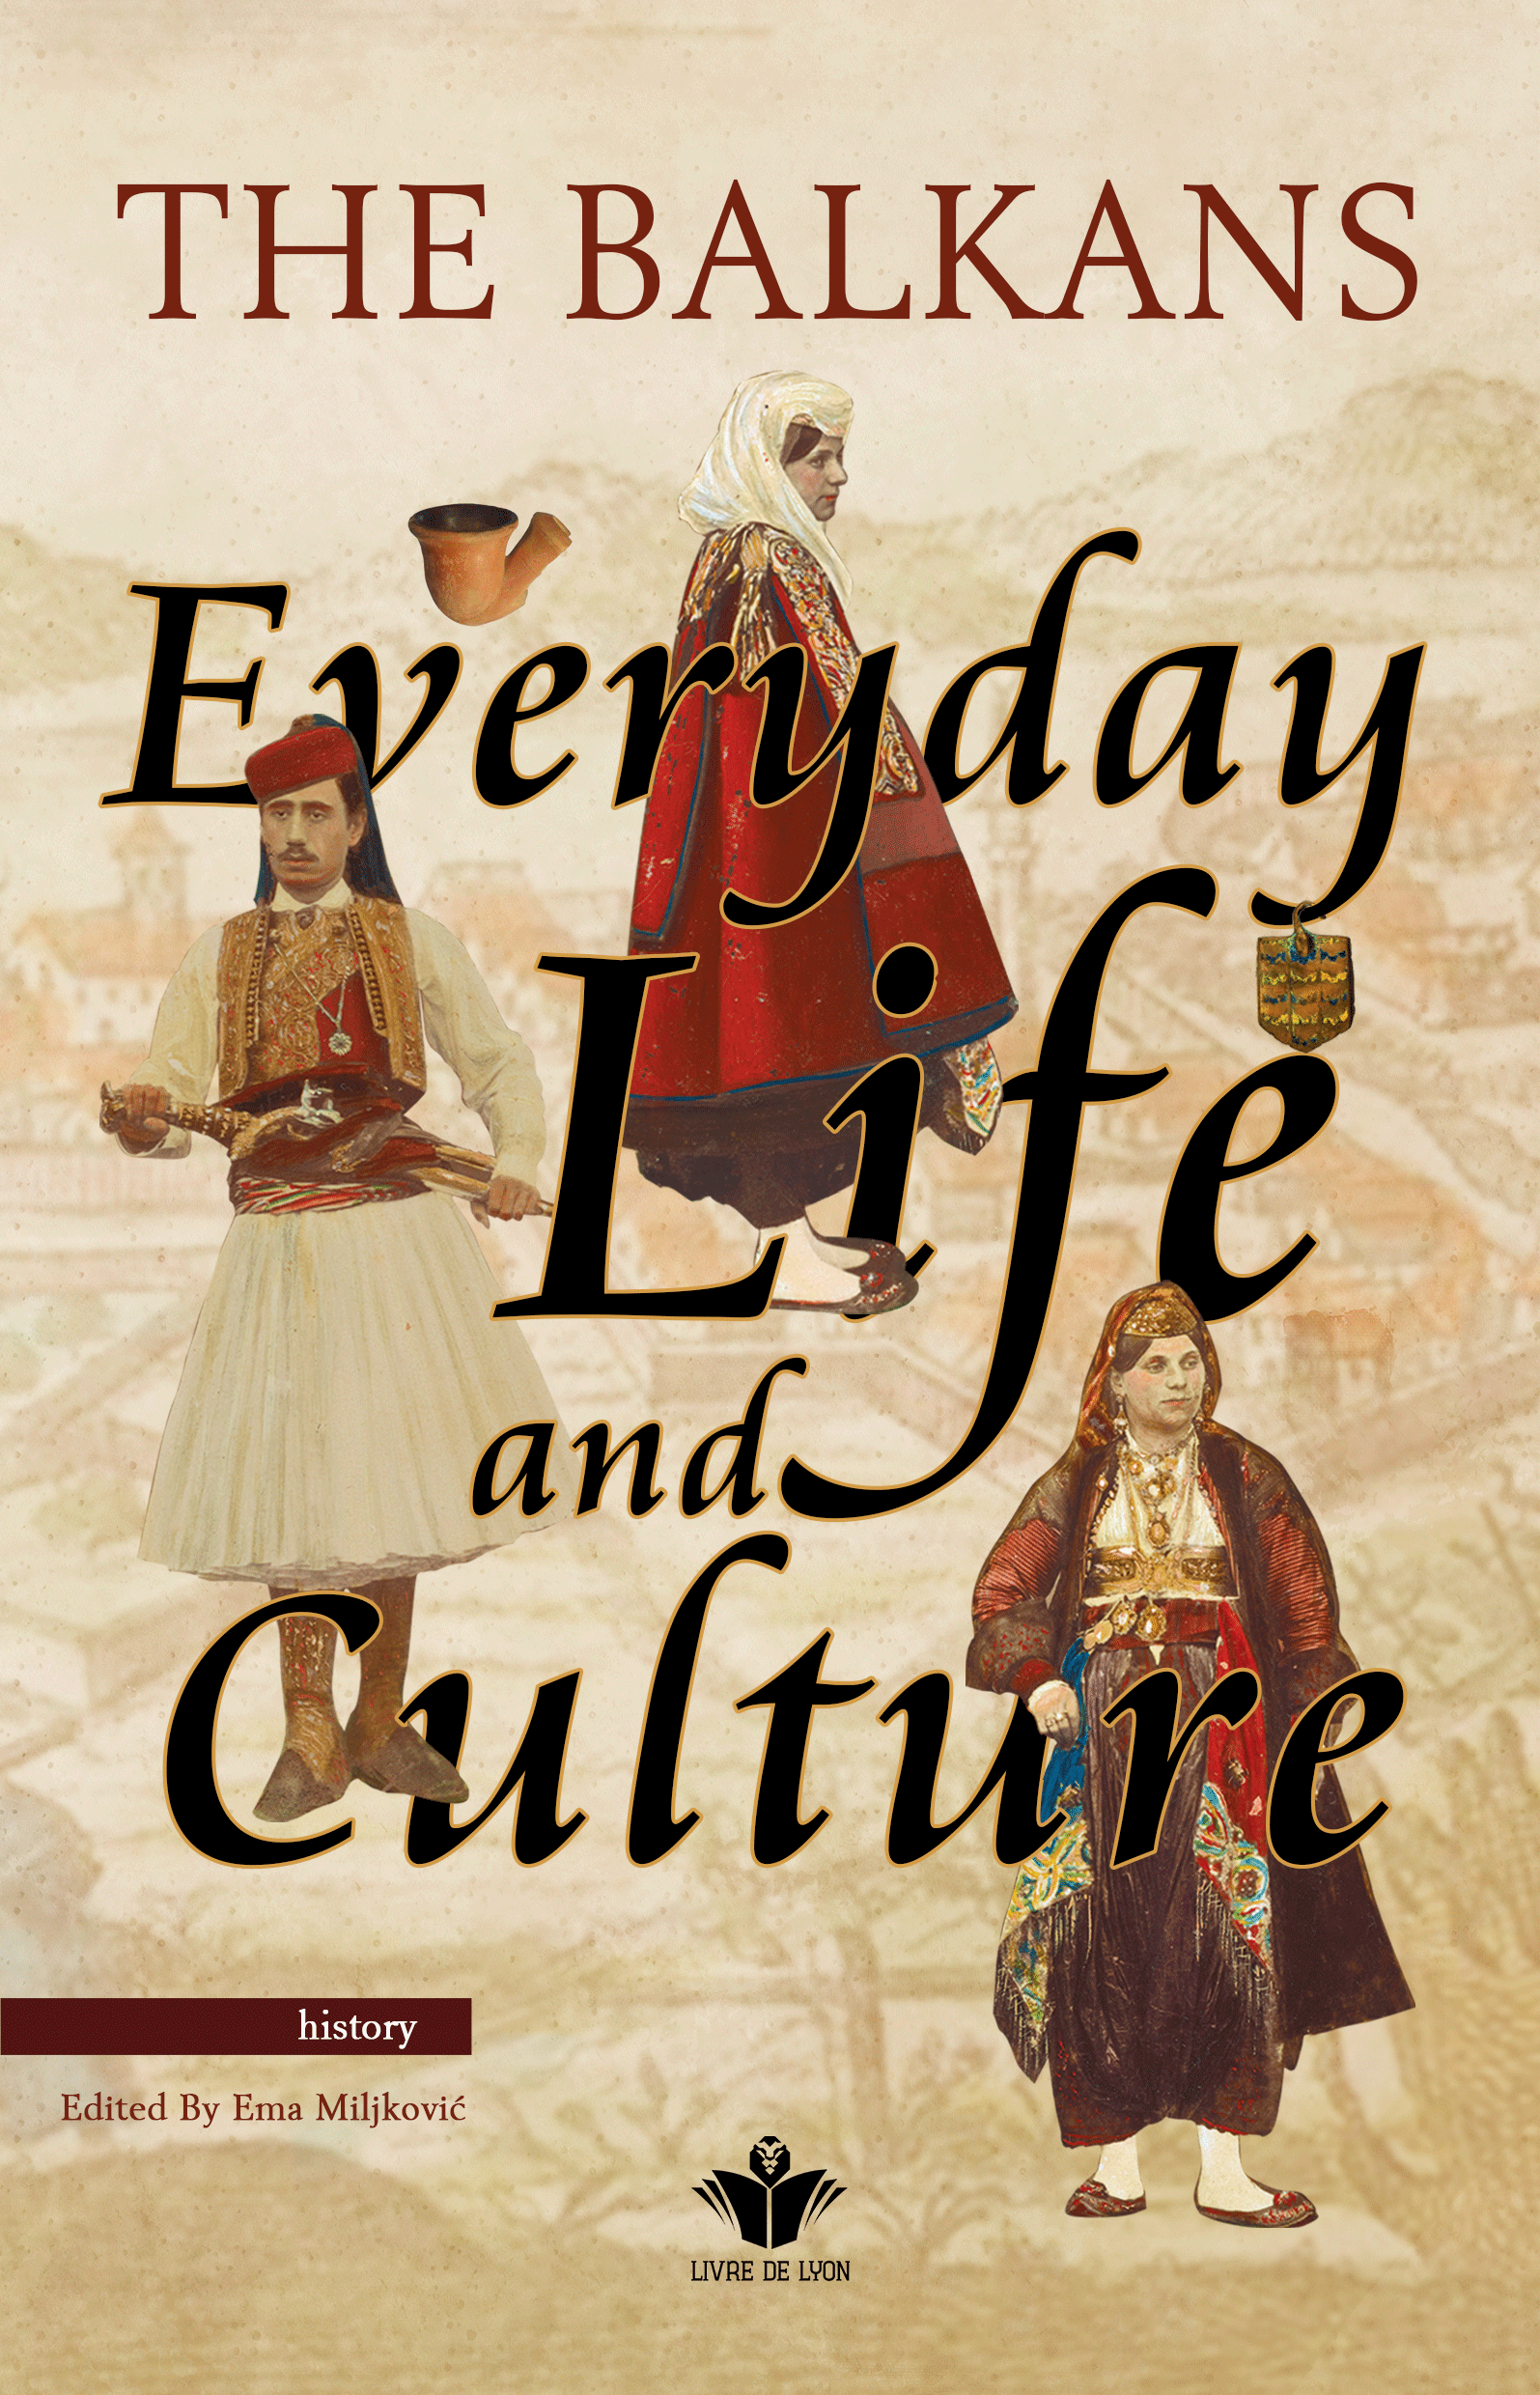 THE BALKANS Everyday Life and Culture